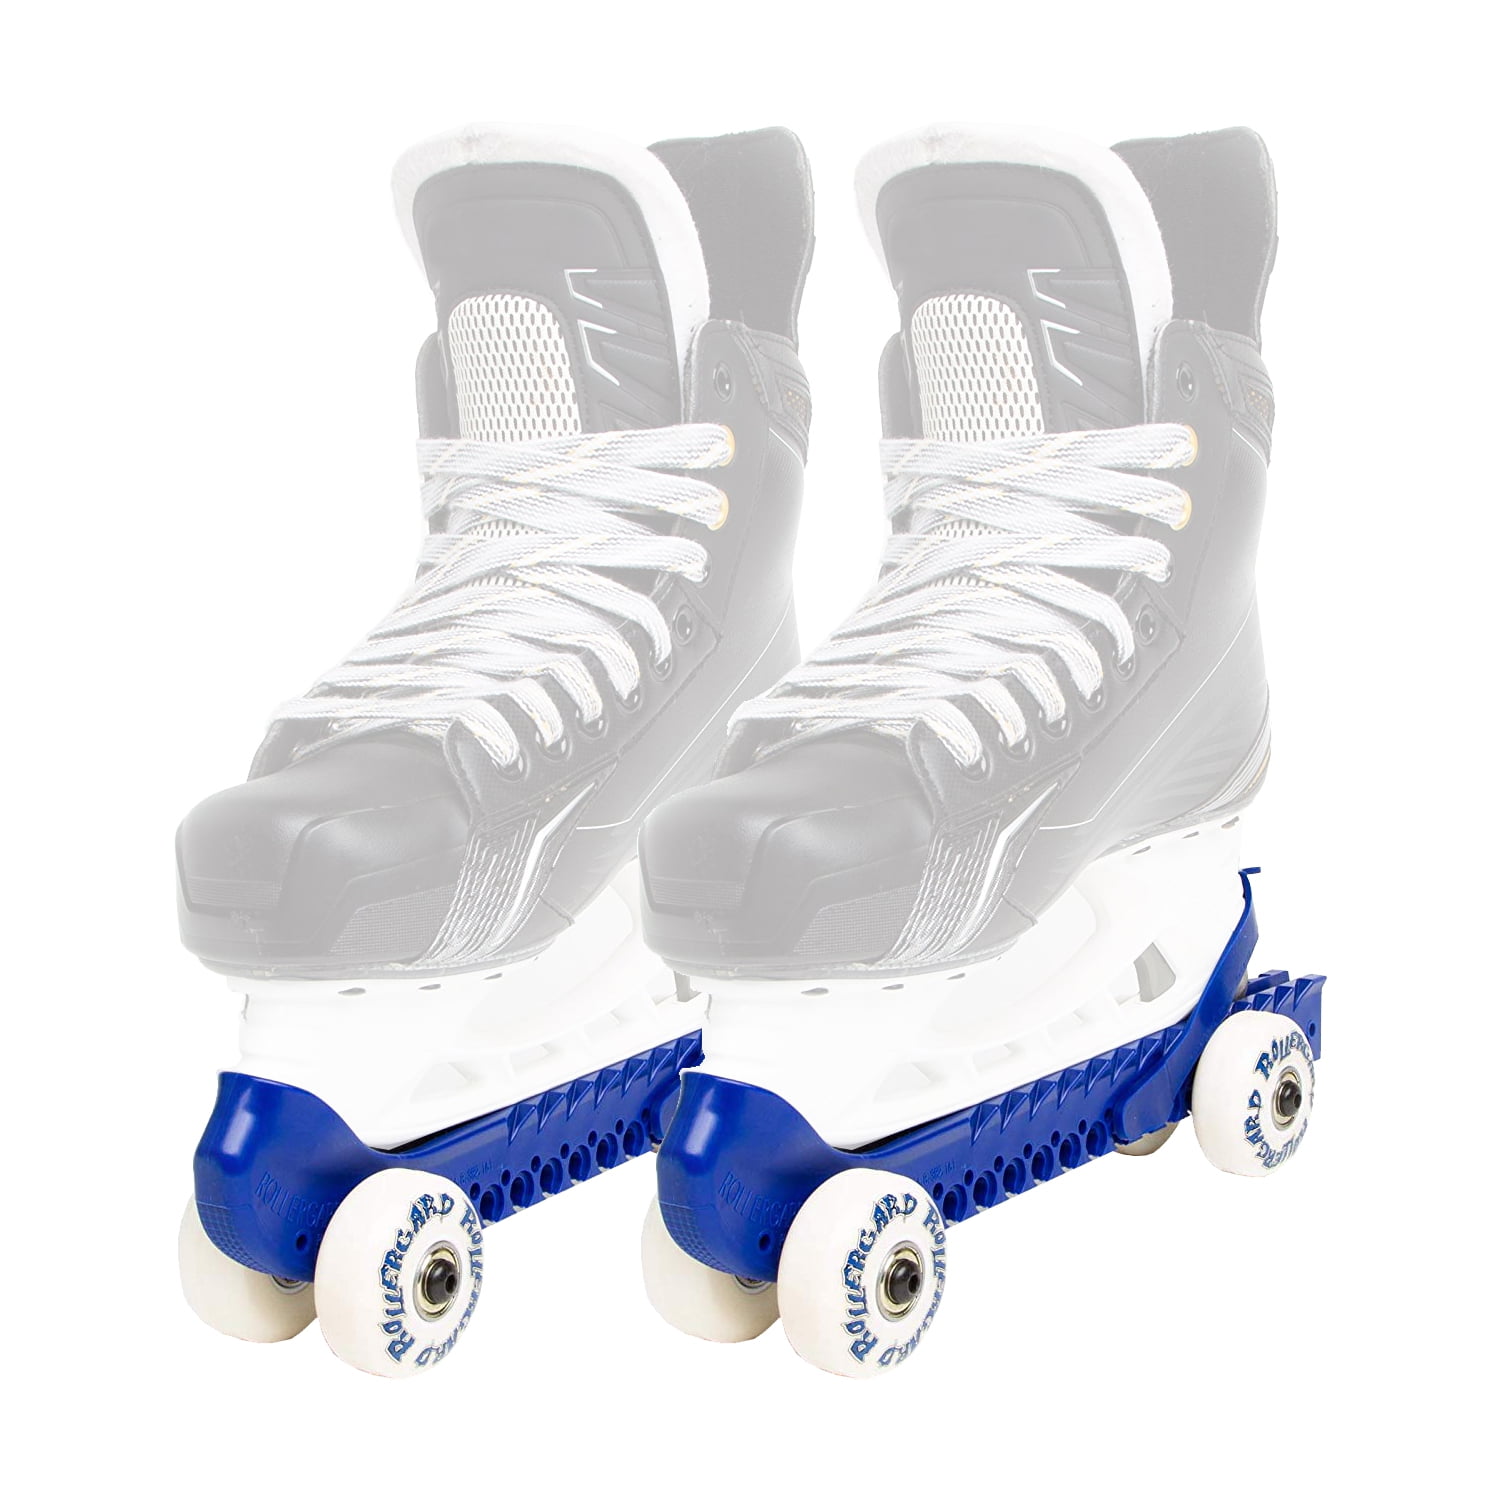 Sold in Pairs NEW in Box Rollergards Rolling Skate Guards 